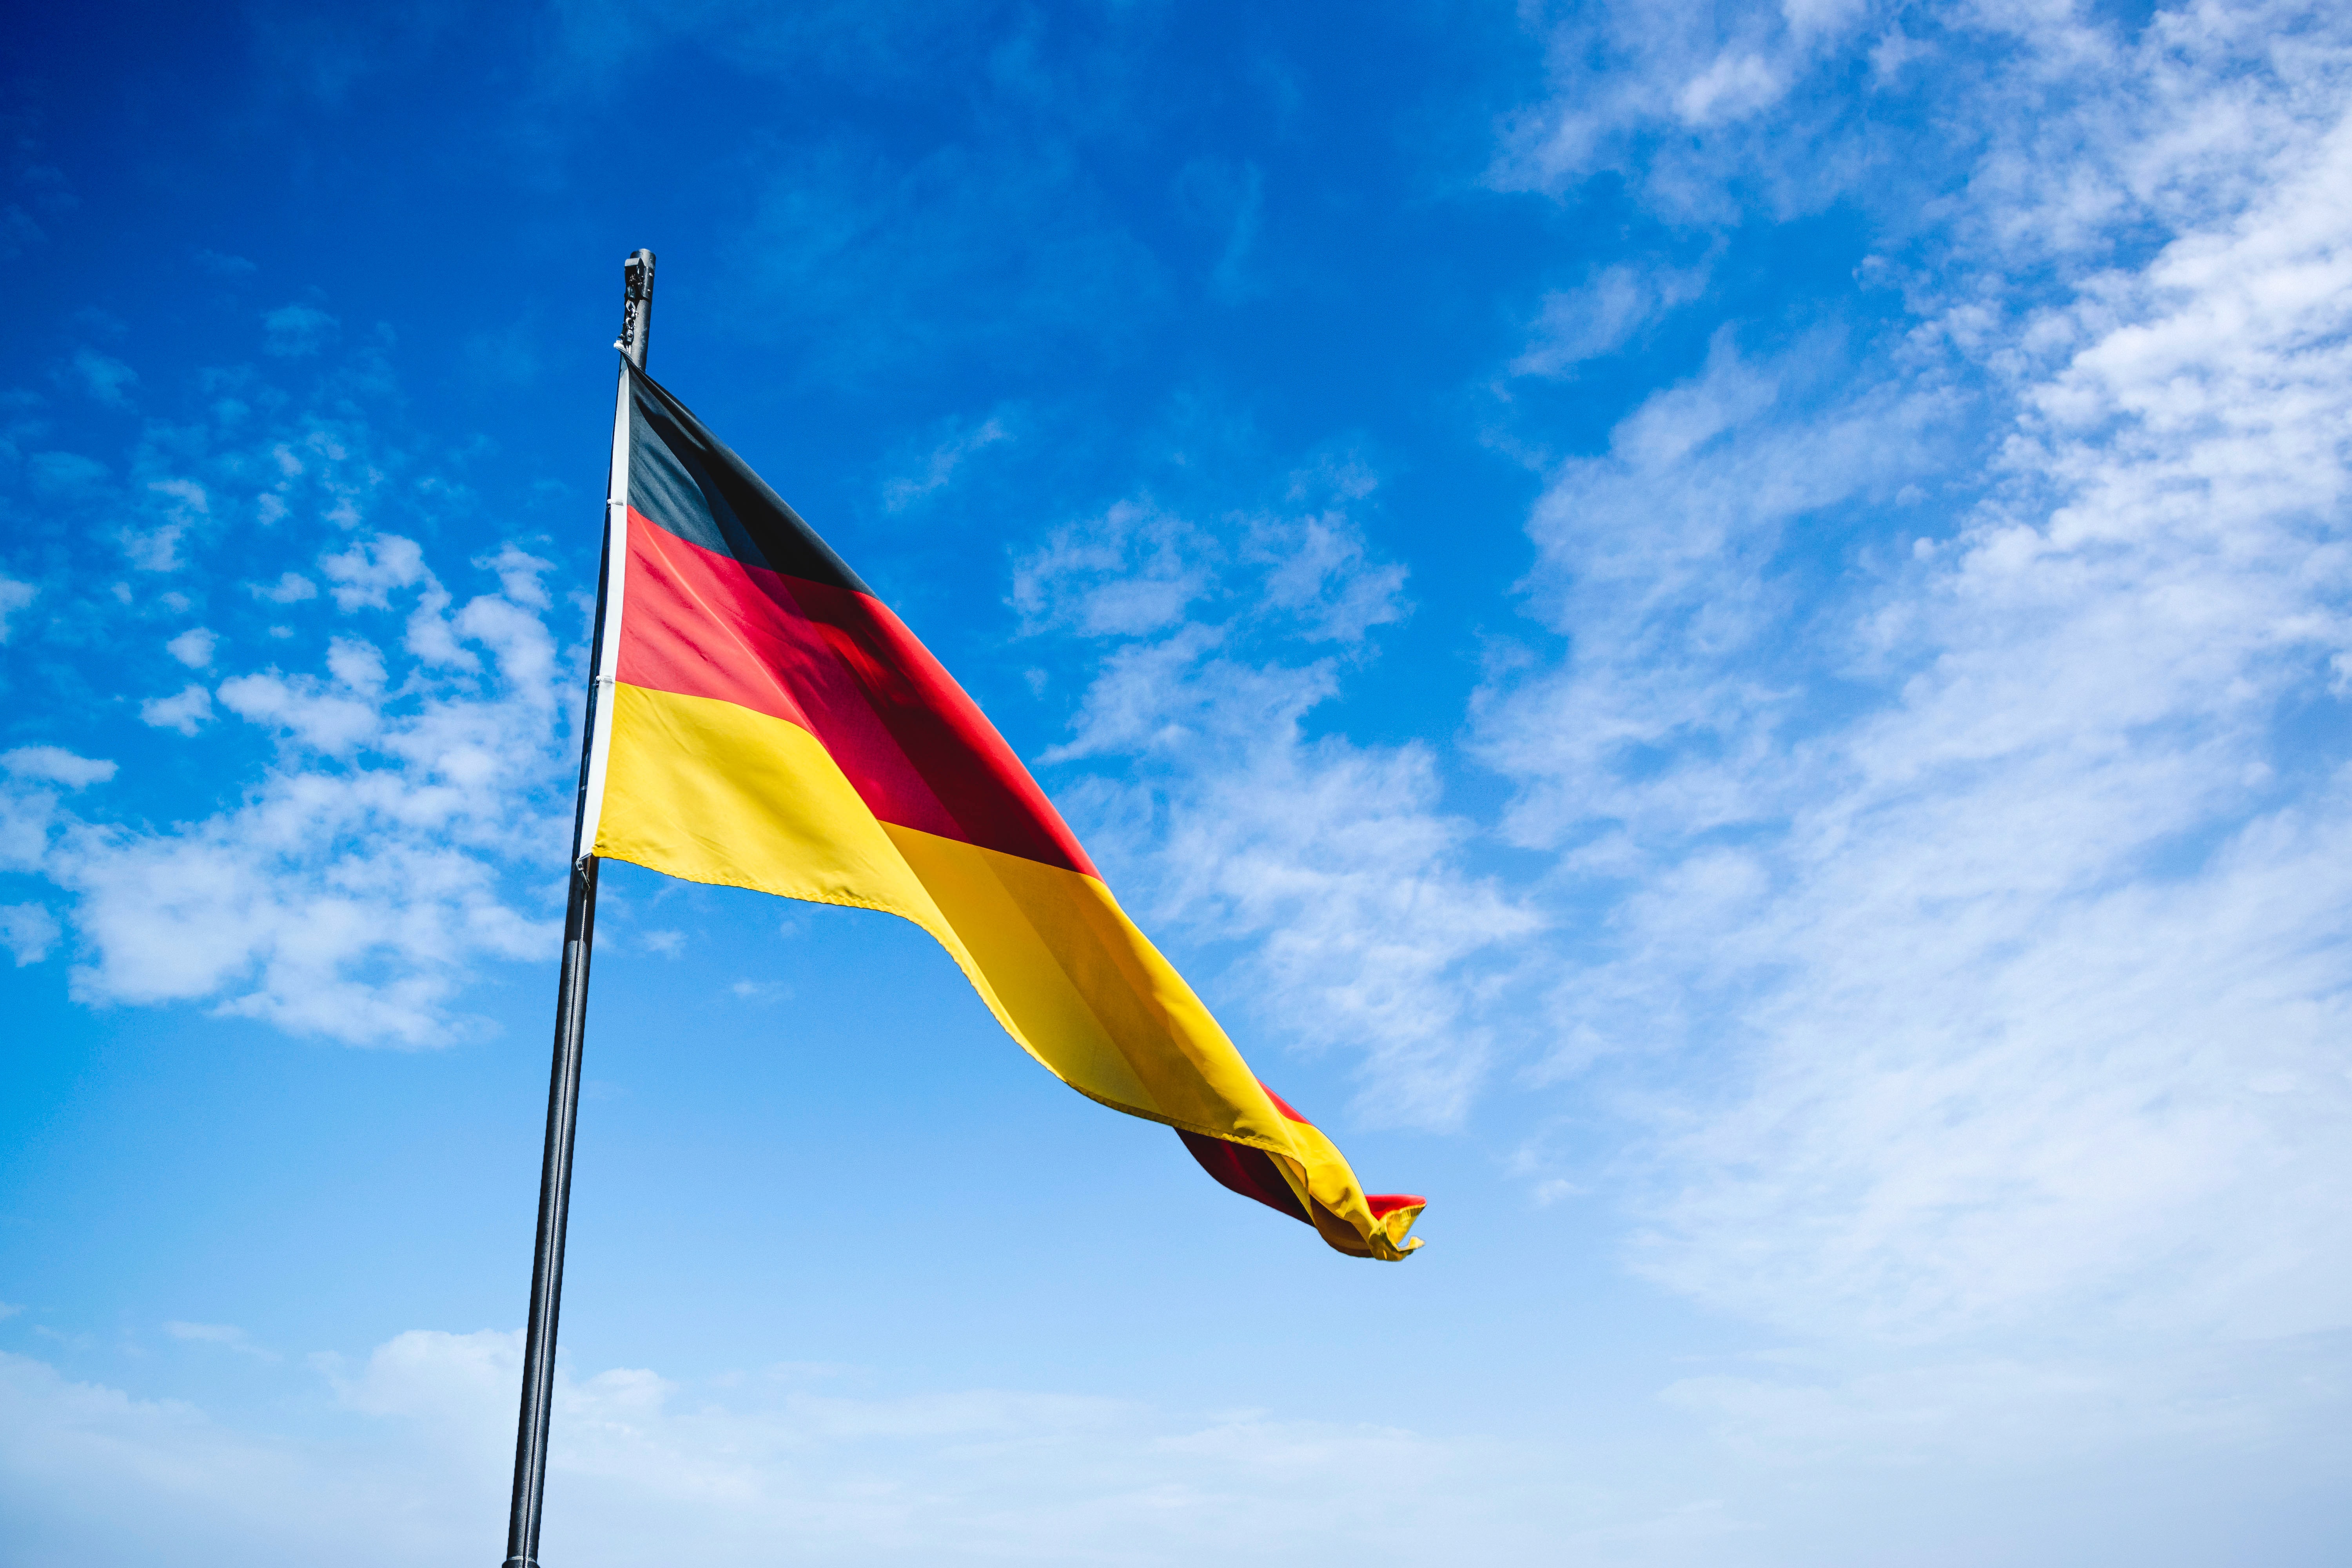 Germany has activated 'alarm' level of its gas emergency scheme